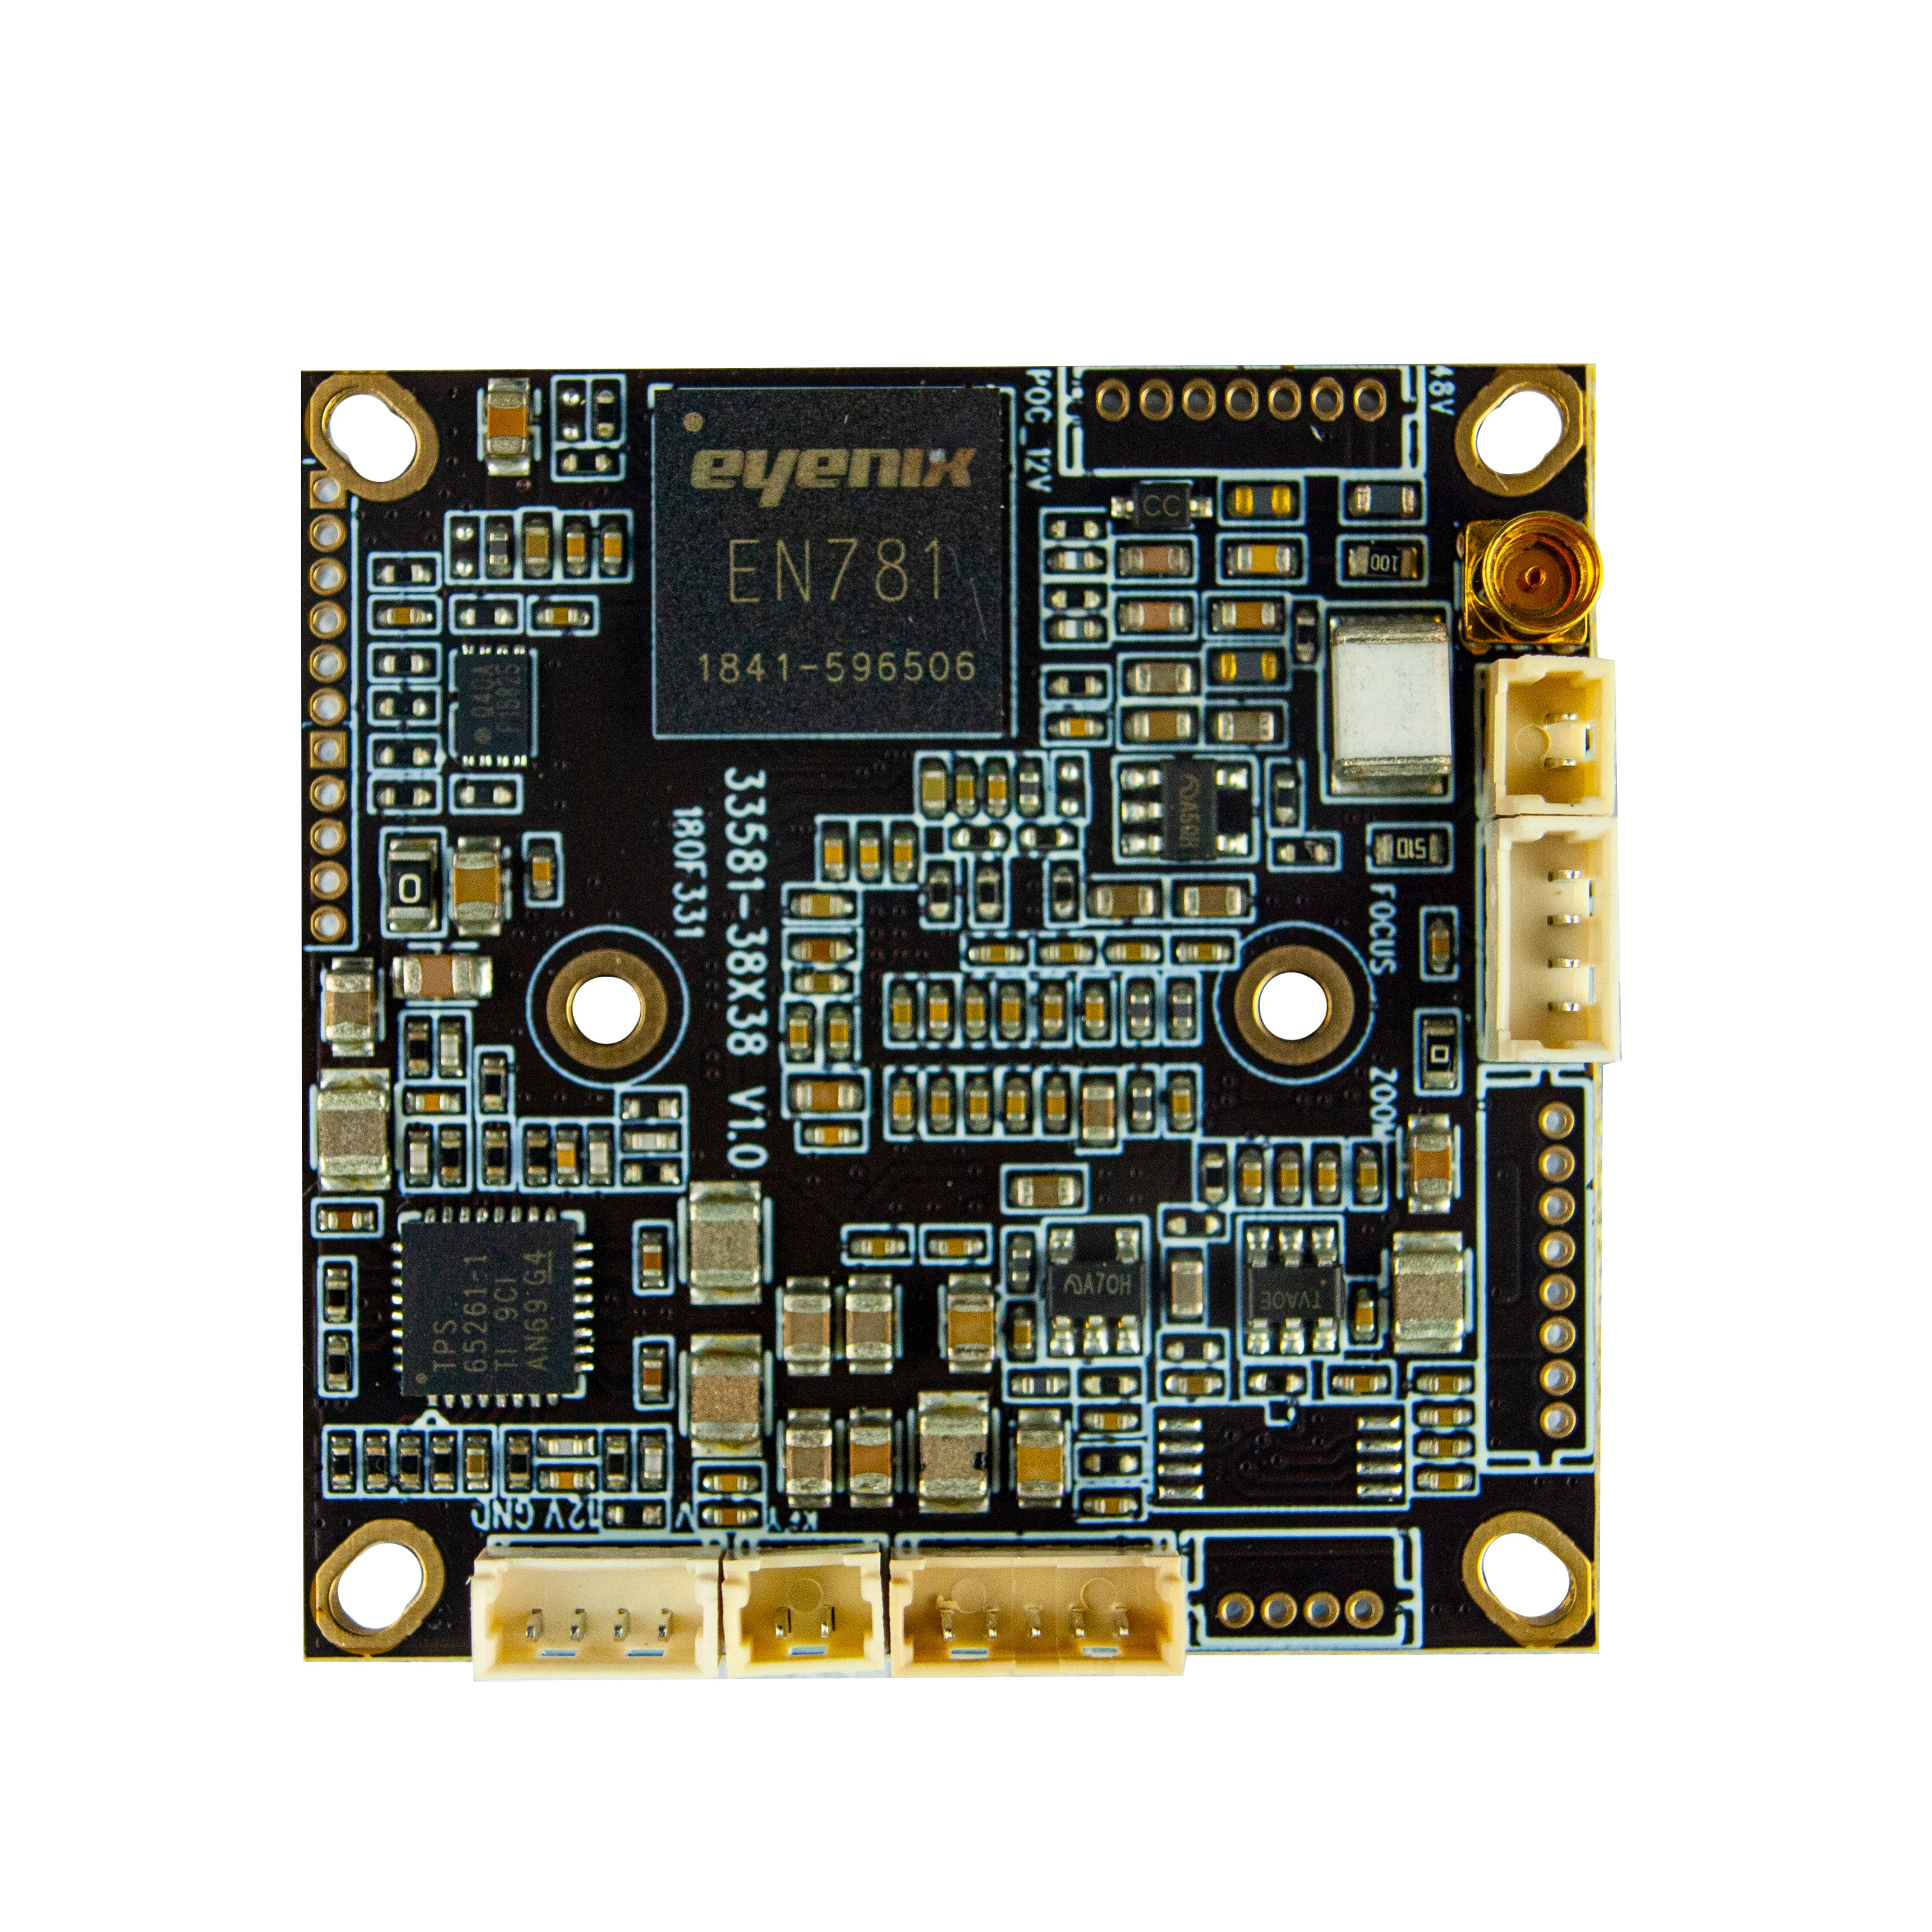 Hot Sale WDR 3D DNR 1/2.8 inch  IMX335 sensor 4mp camera pcb board for security camera (1600720974343)